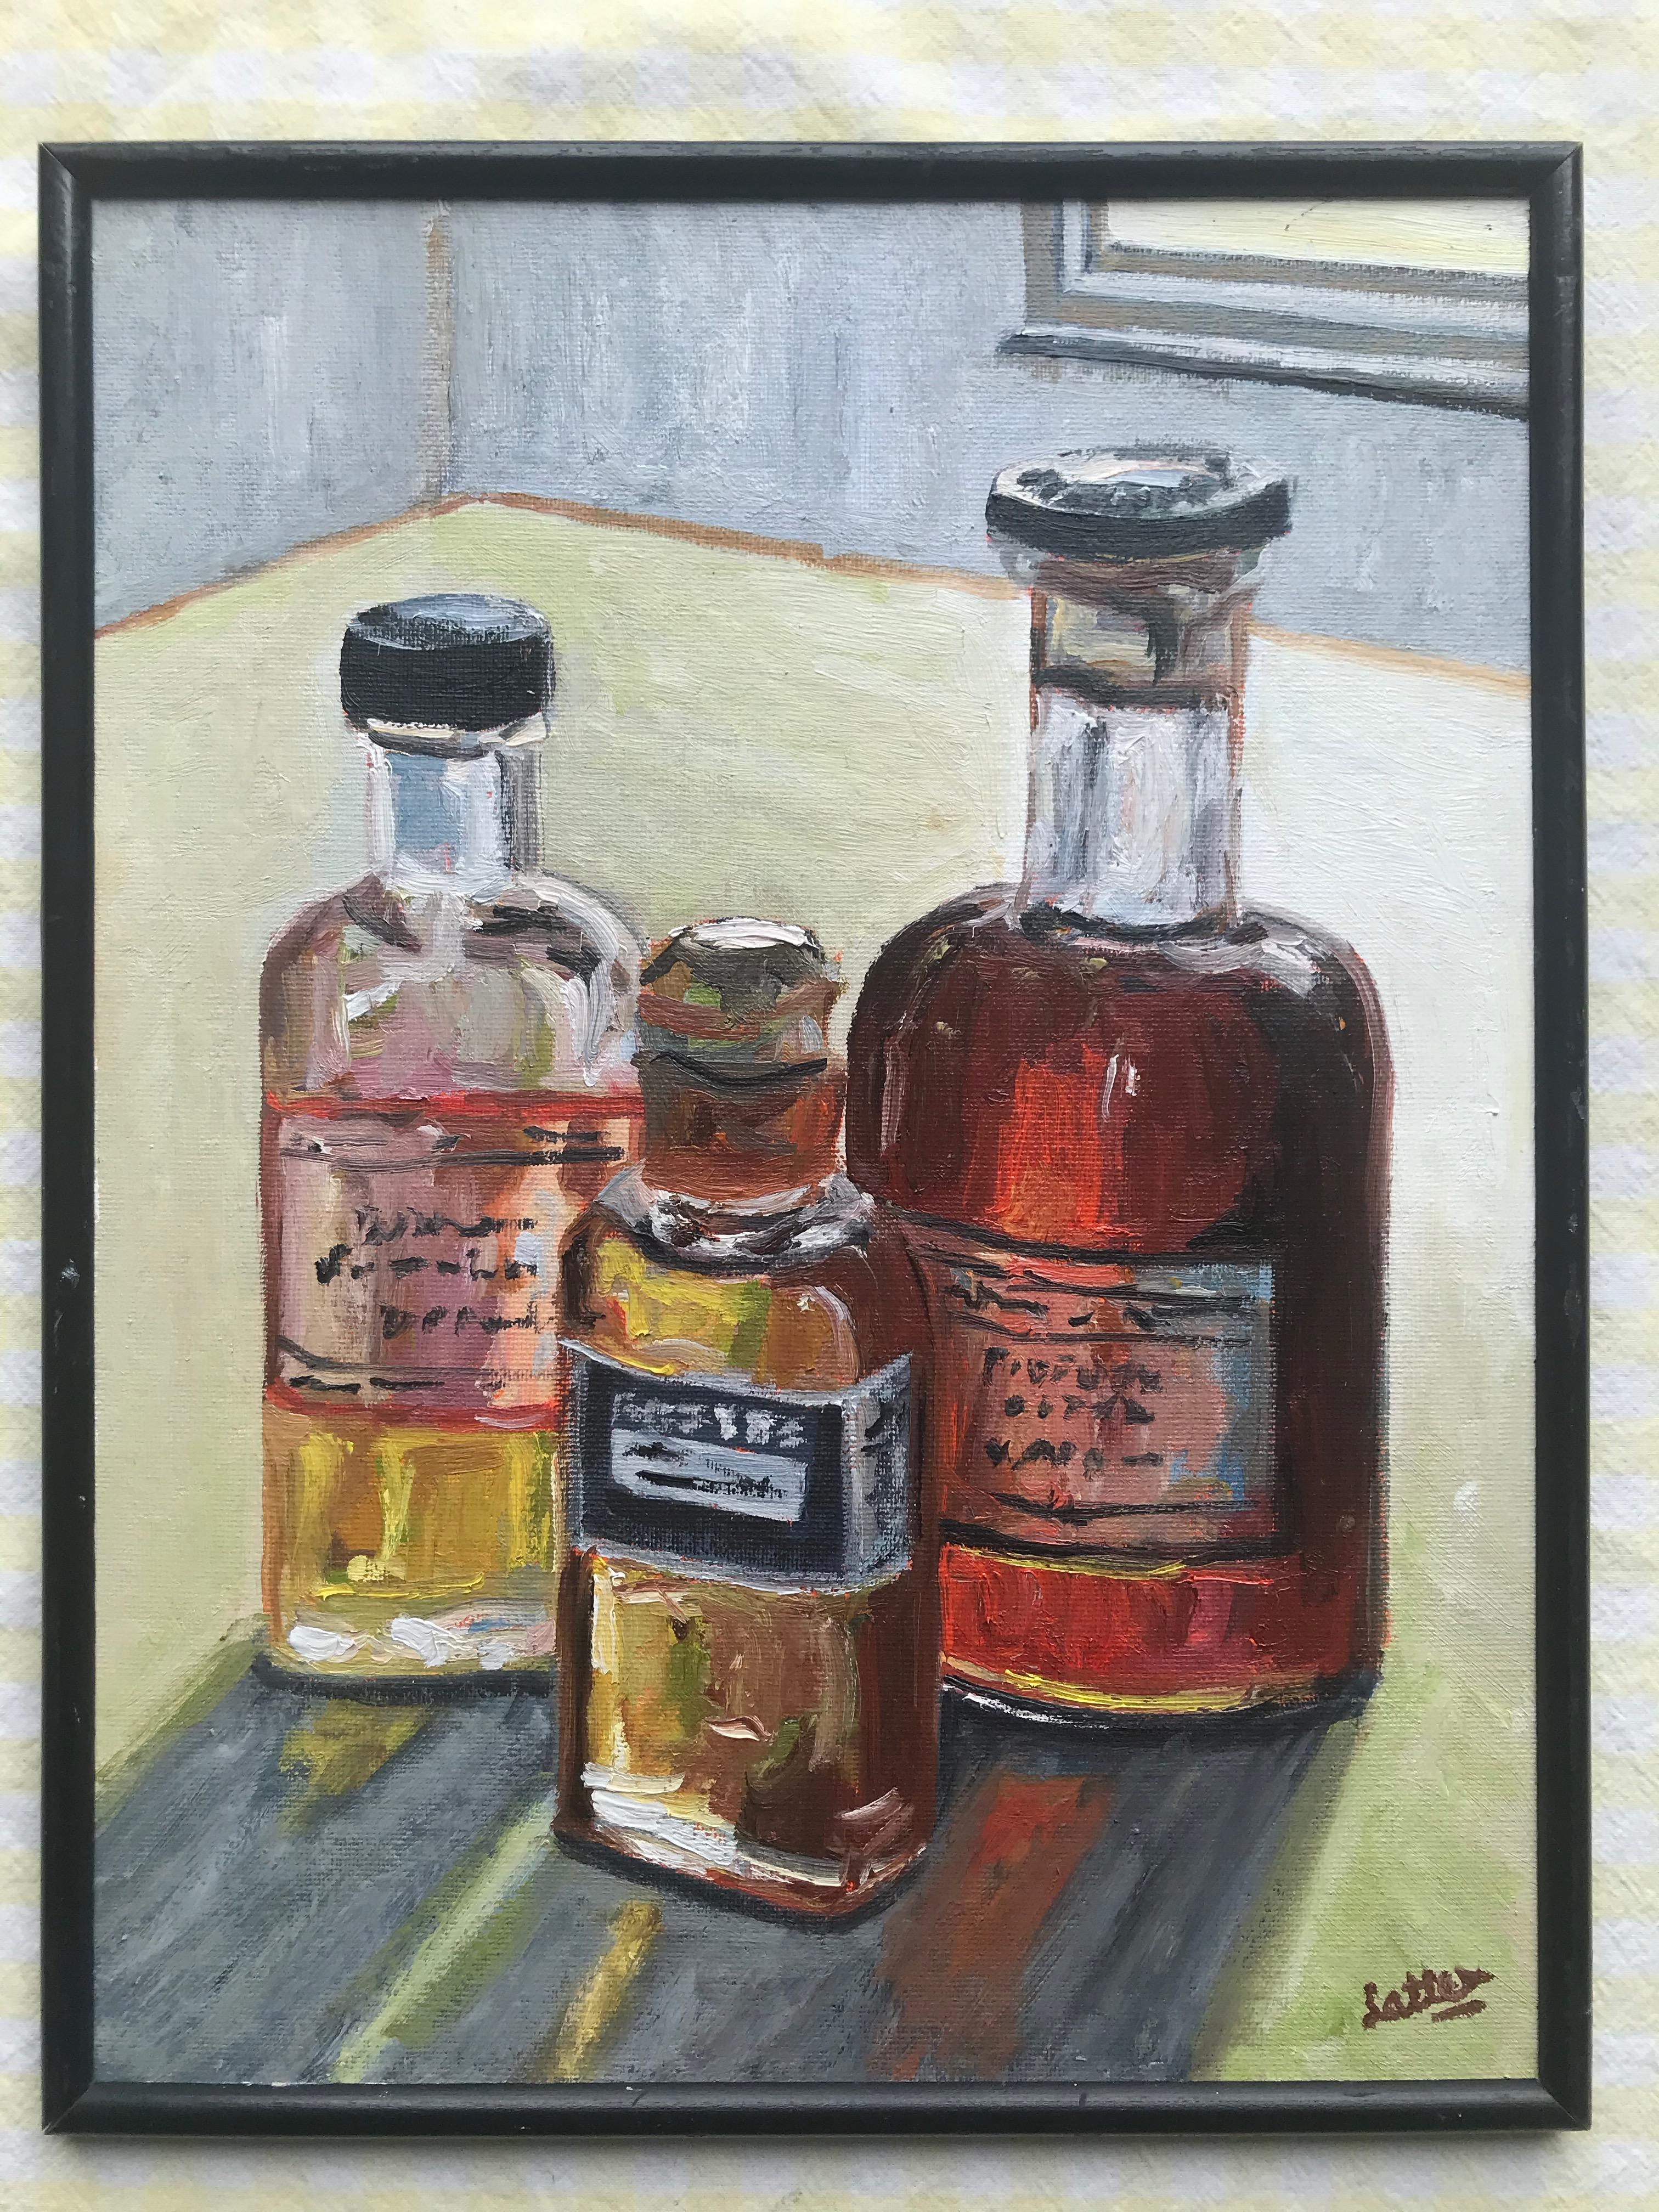 Alan Latter (born 1961)
Varnish bottle
Signed and dated 2021
Oil on board
13¾ x 10½ inches 
14½ x 11¼ inches including the frame

A charming still life capturing the artist's working materials.

Born in Islington in 1961, Alan Latter's work is